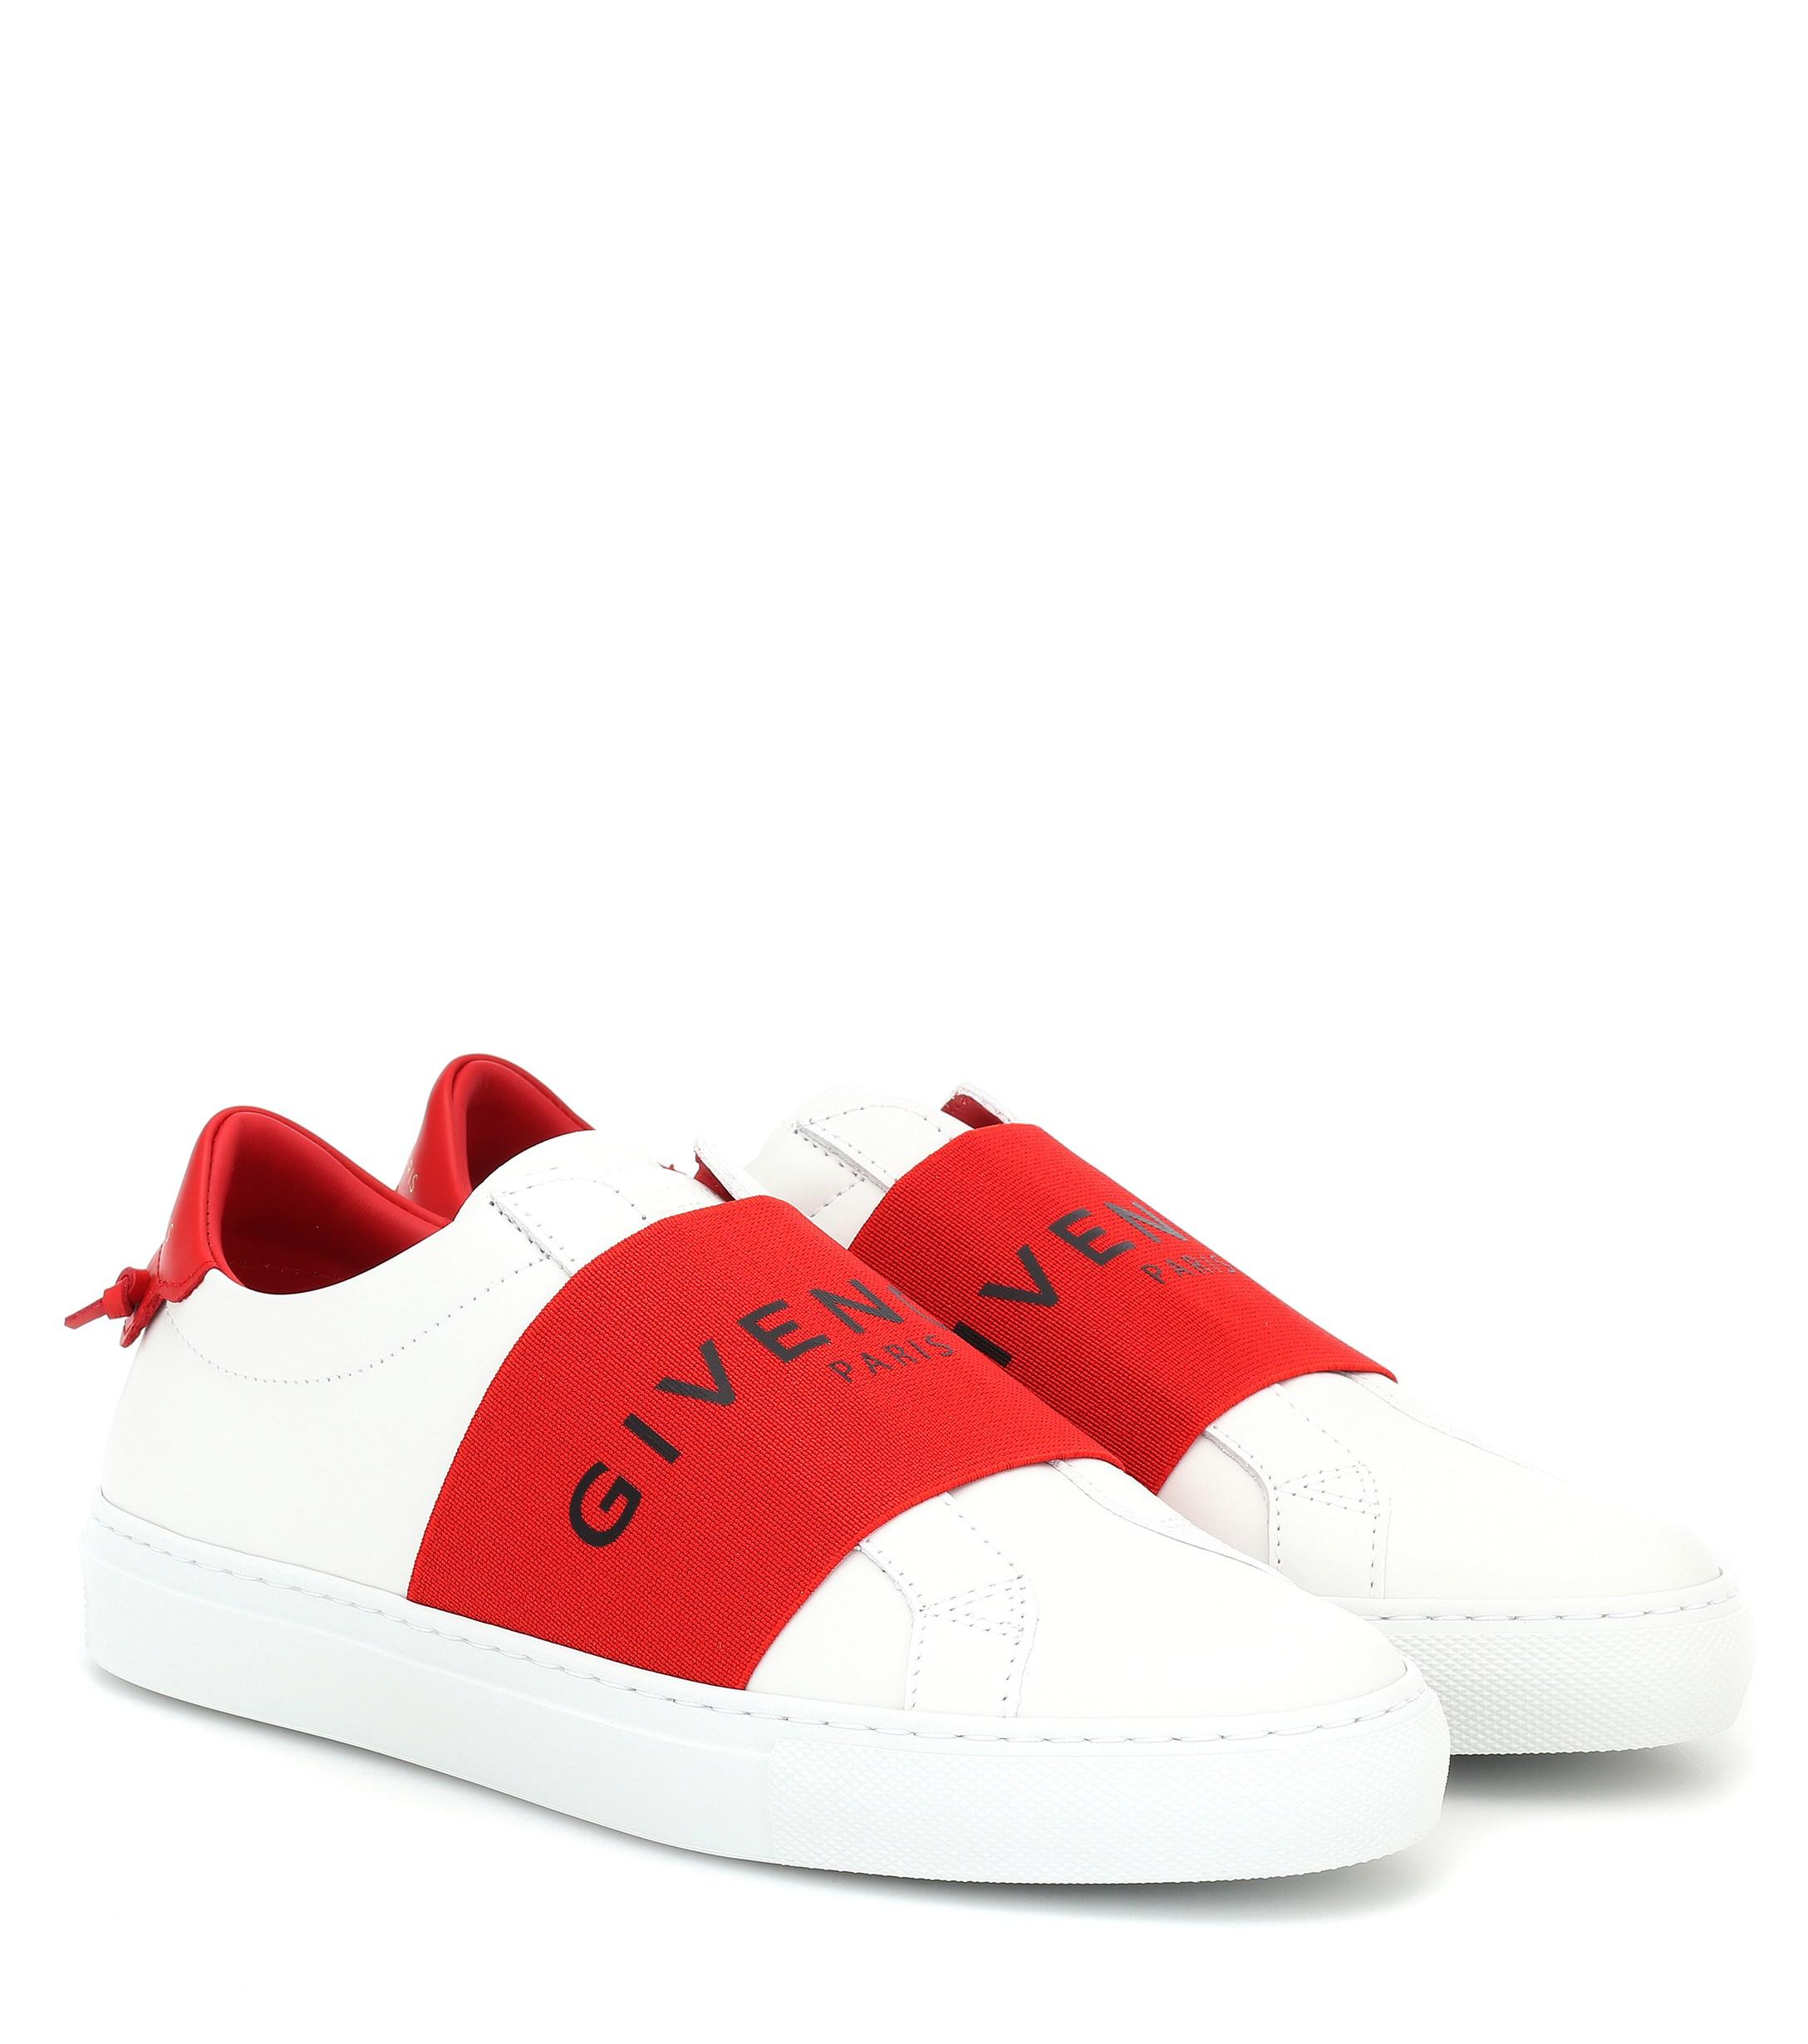 Givenchy Urban Street Leather Sneakers in Red - Save 5% - Lyst